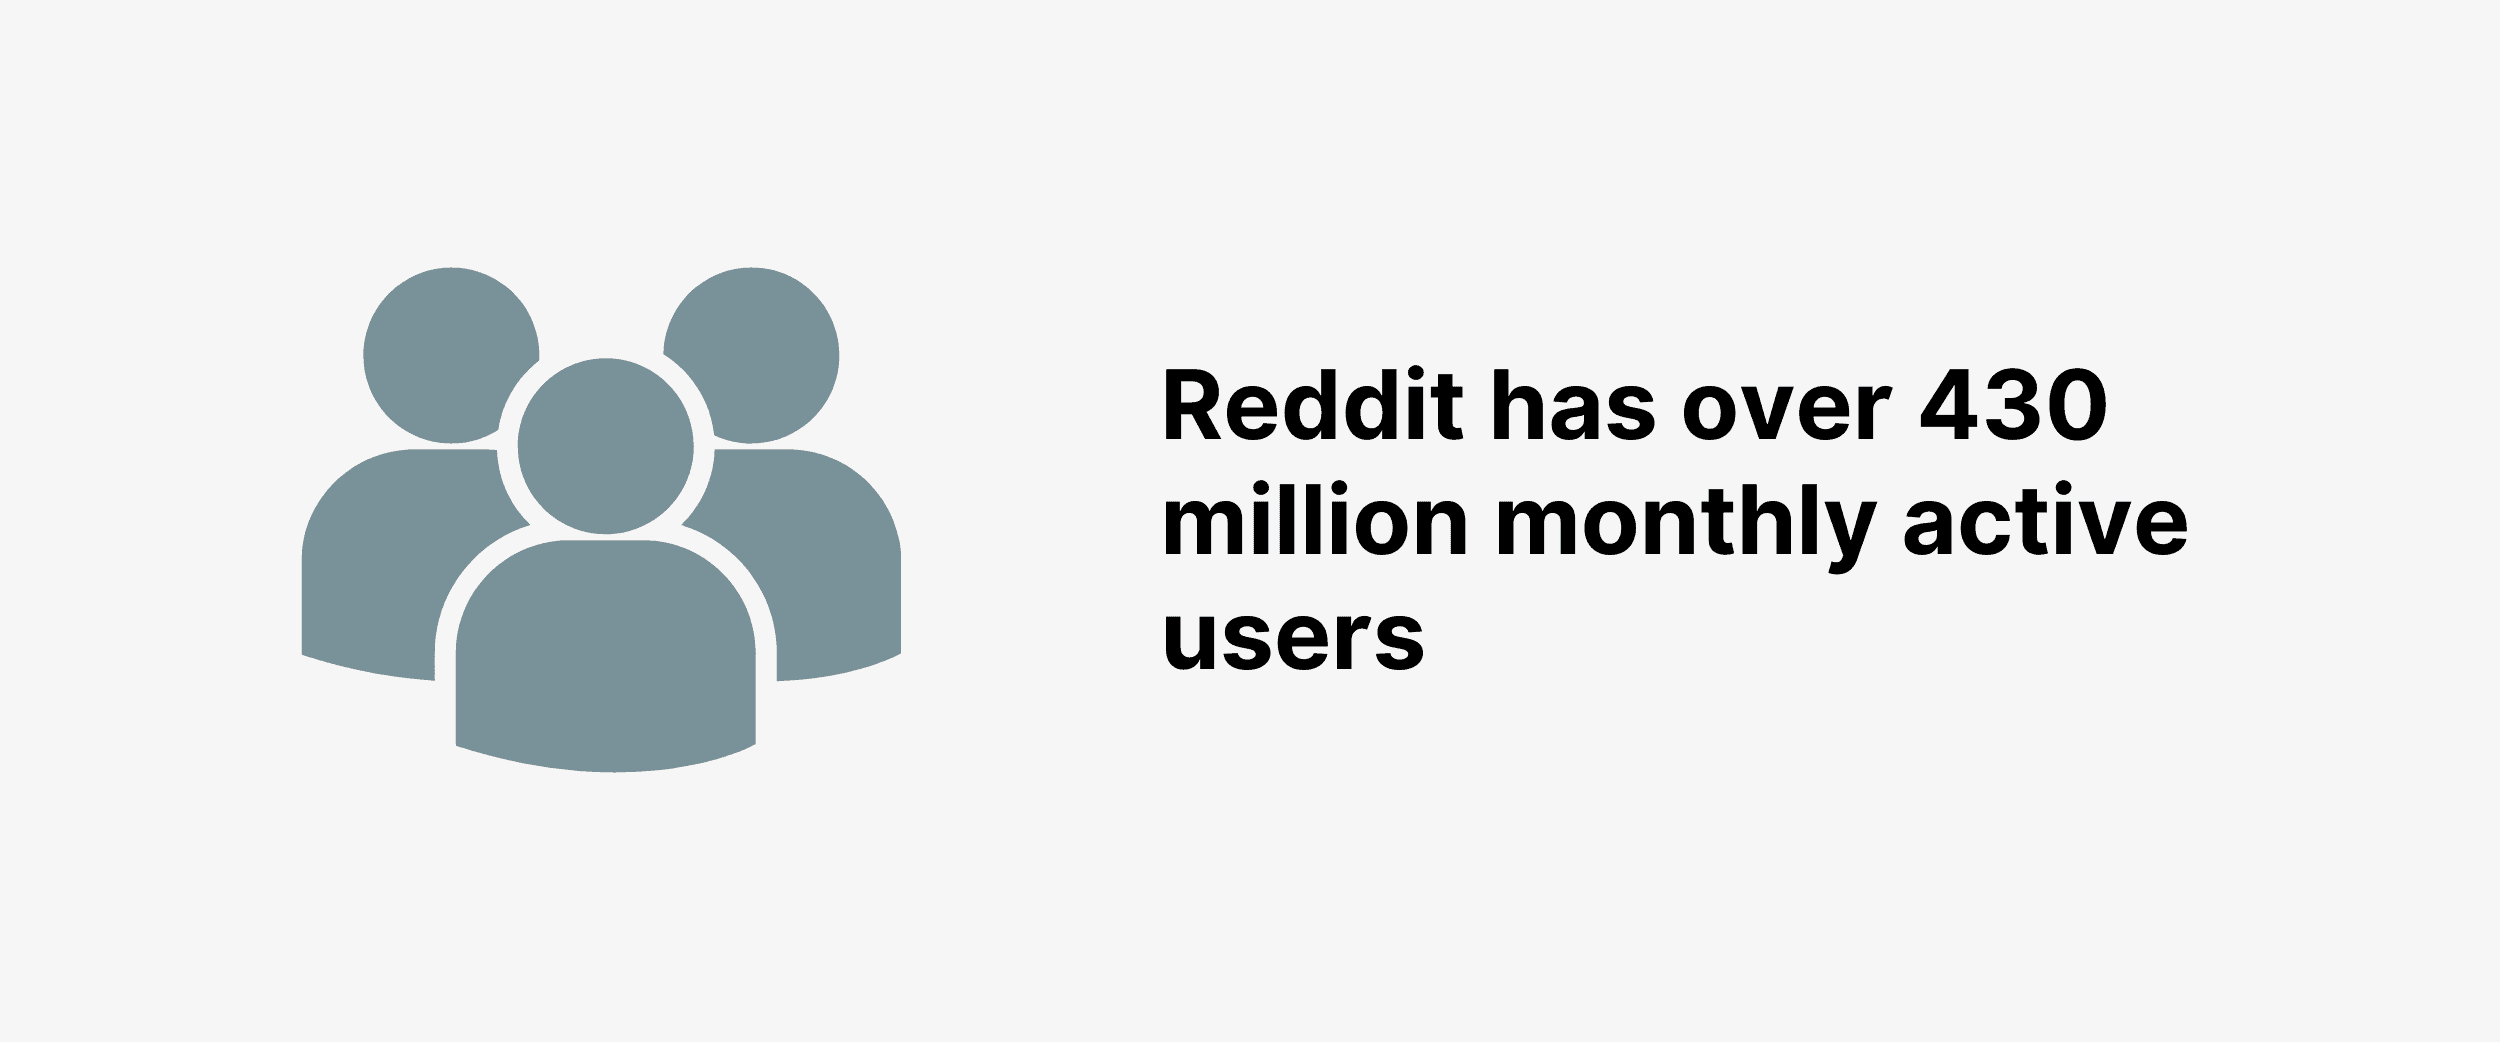 Reddit has over 430 million monthly active users